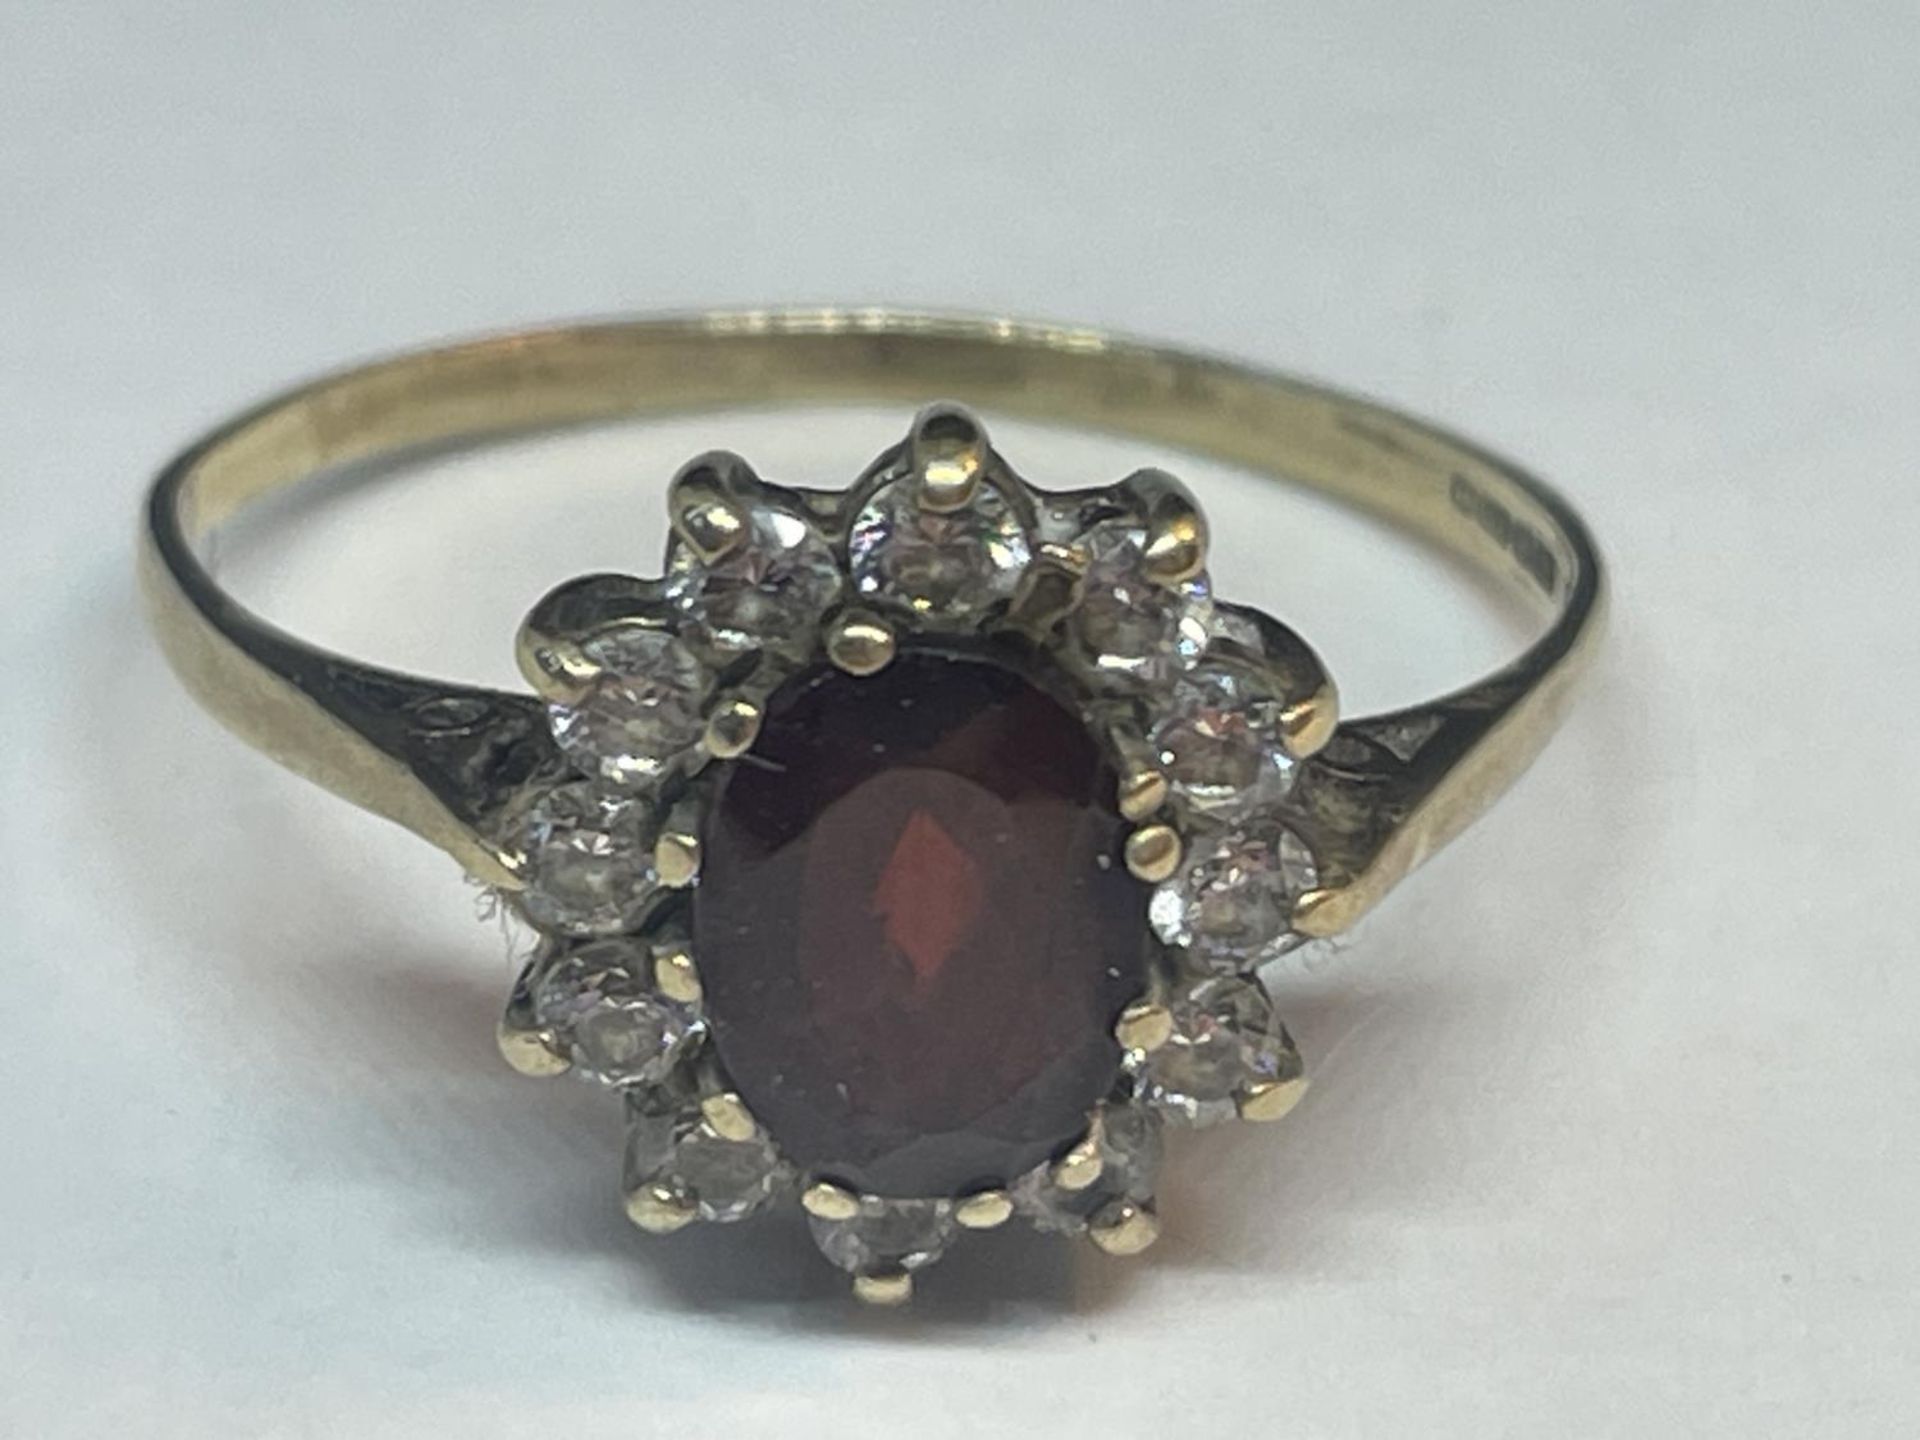 A 9 CARAT GOLD RING WITH A CENTRE GARNET SURROUNDED BY CUBIC ZIRCONIAS SIZE V